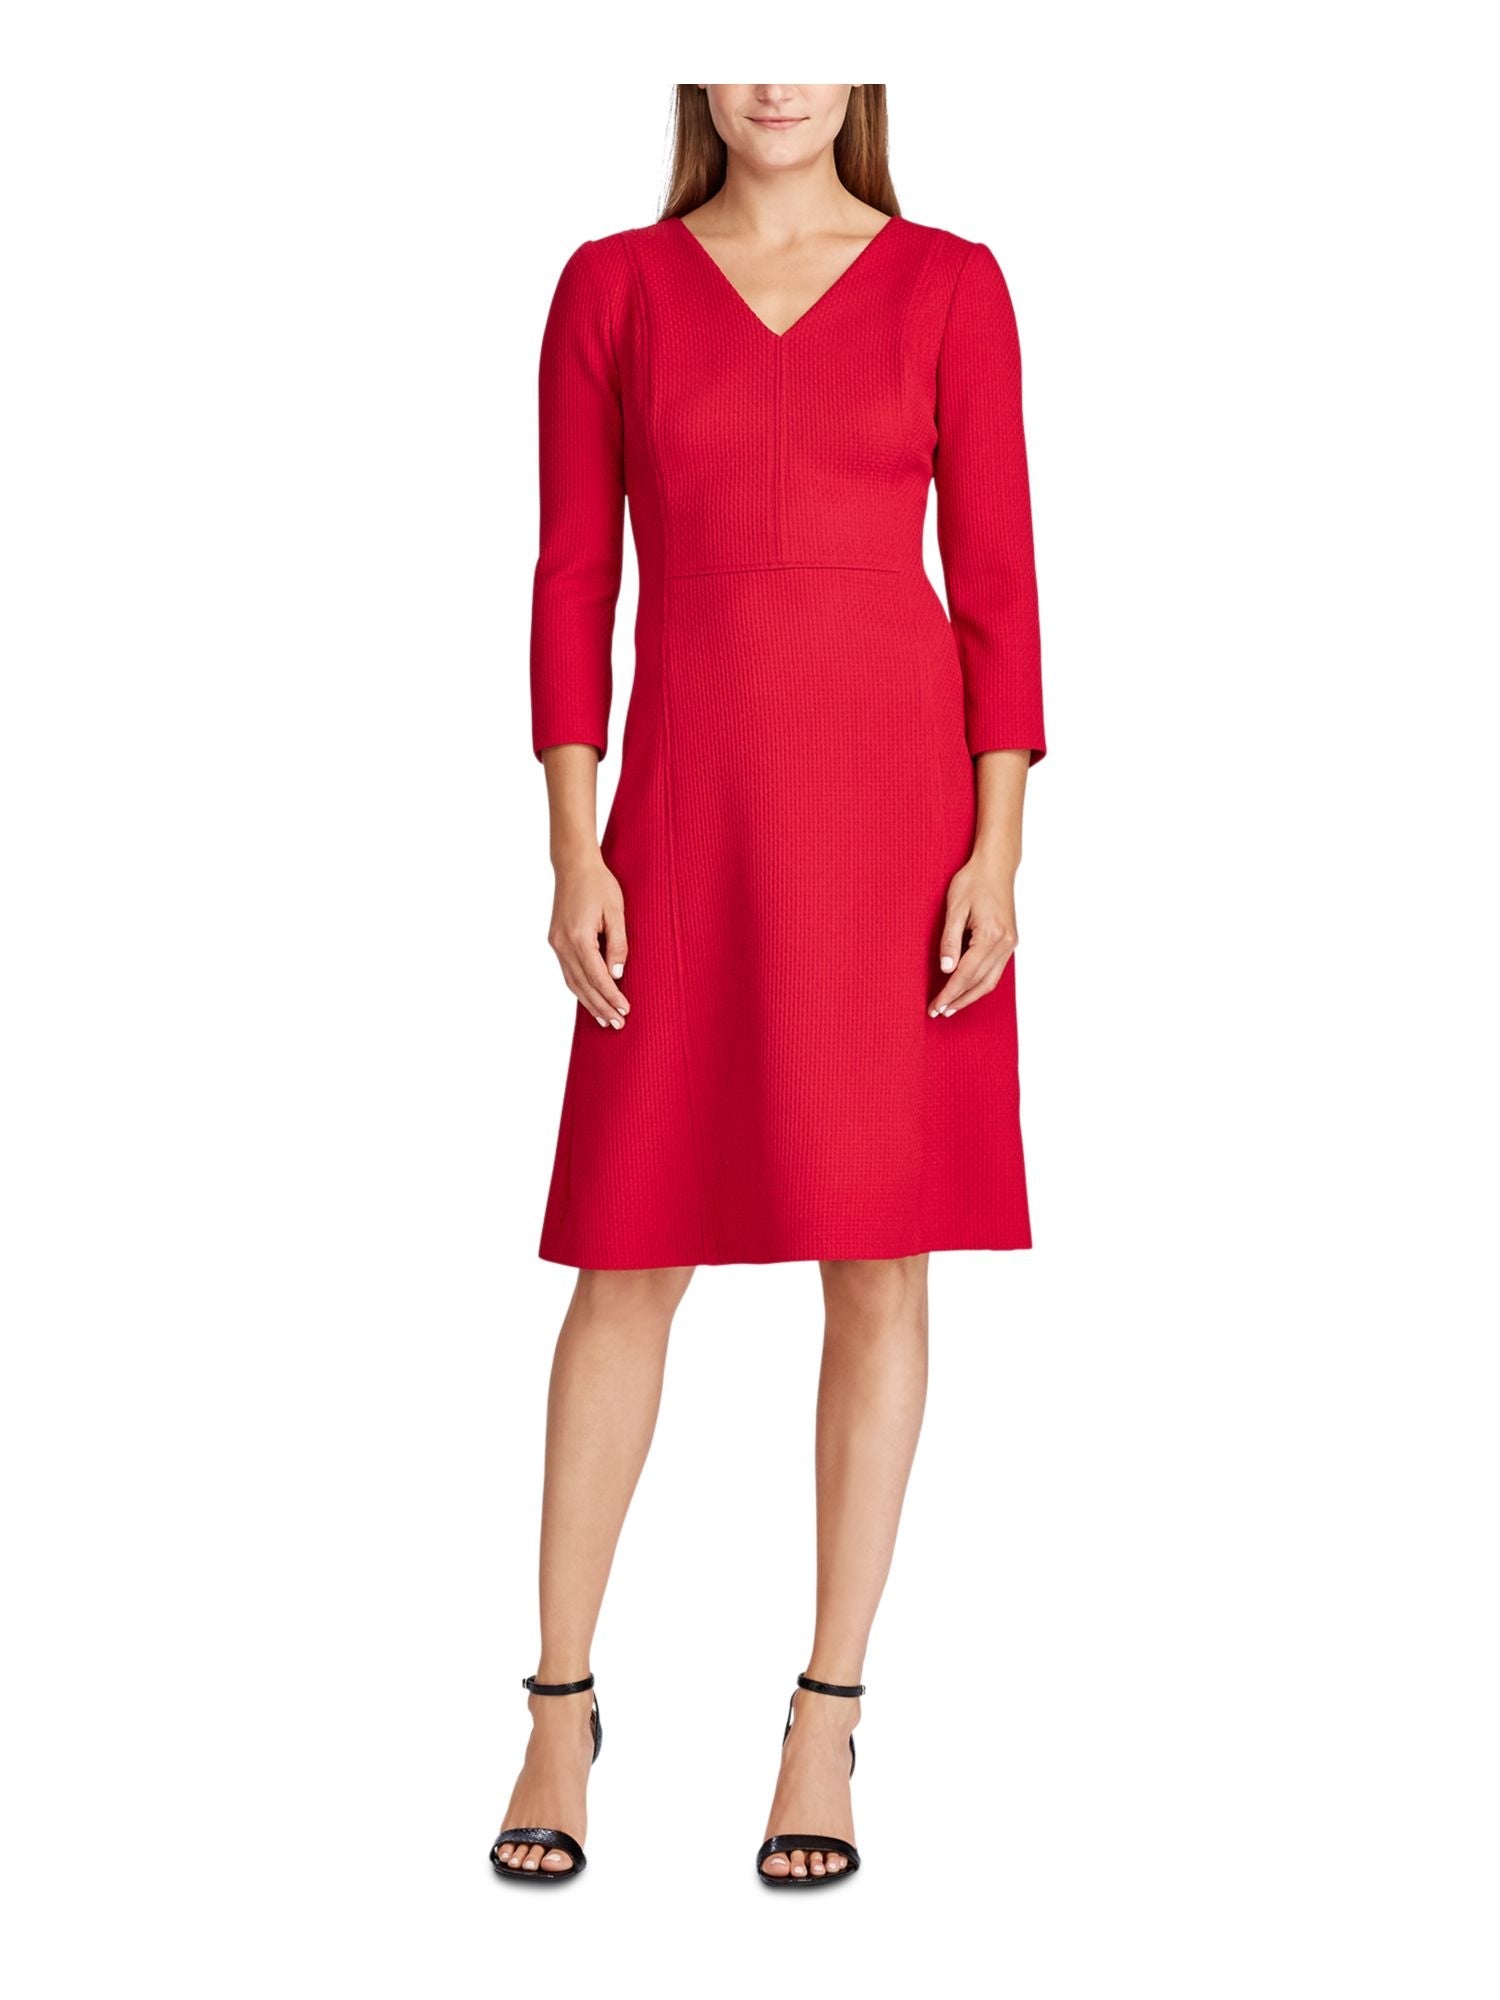 Ralph Lauren Women's 3/4 Sleeve Above The Knee Fit + Flare Party Dress Red Size 0